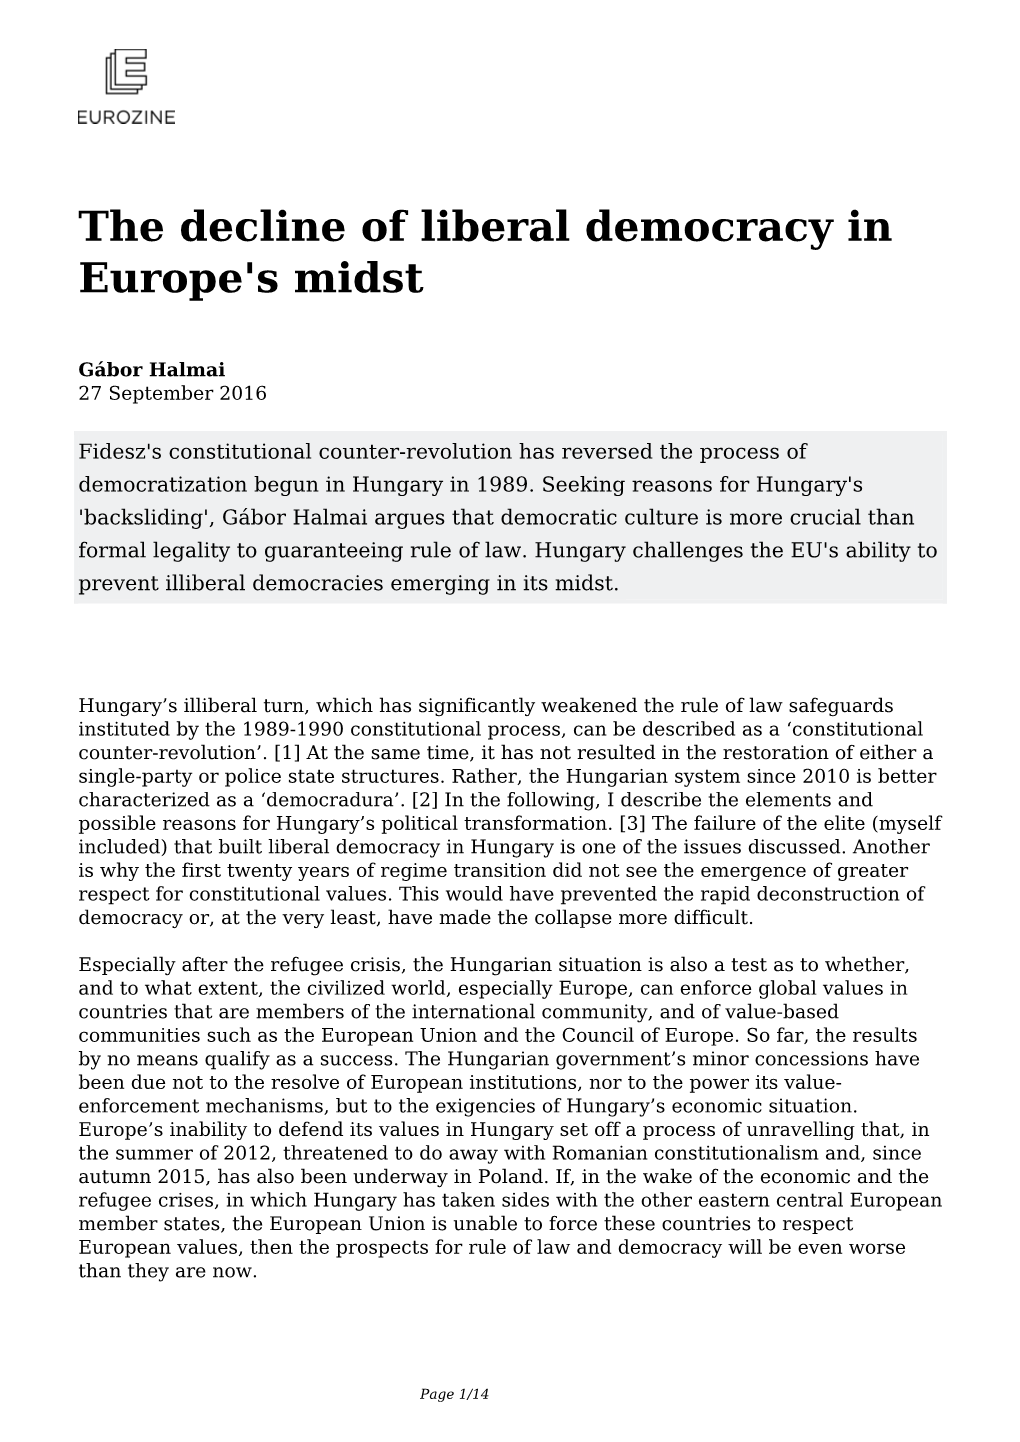 The Decline of Liberal Democracy in Europe's Midst